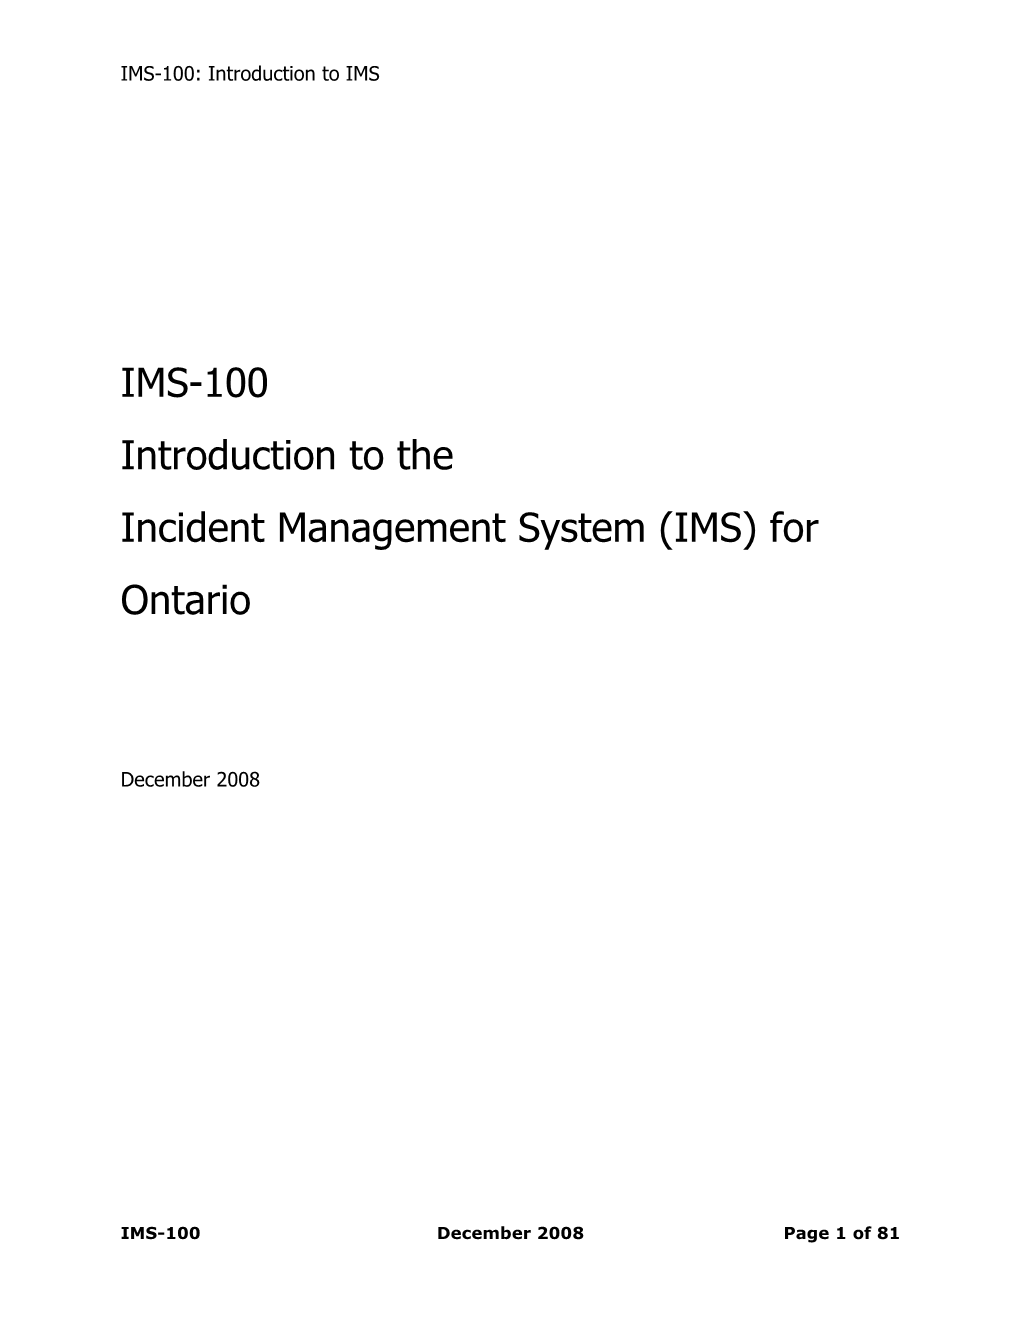 IMS-100 Introduction to the Incident Management System (IMS) for Ontario